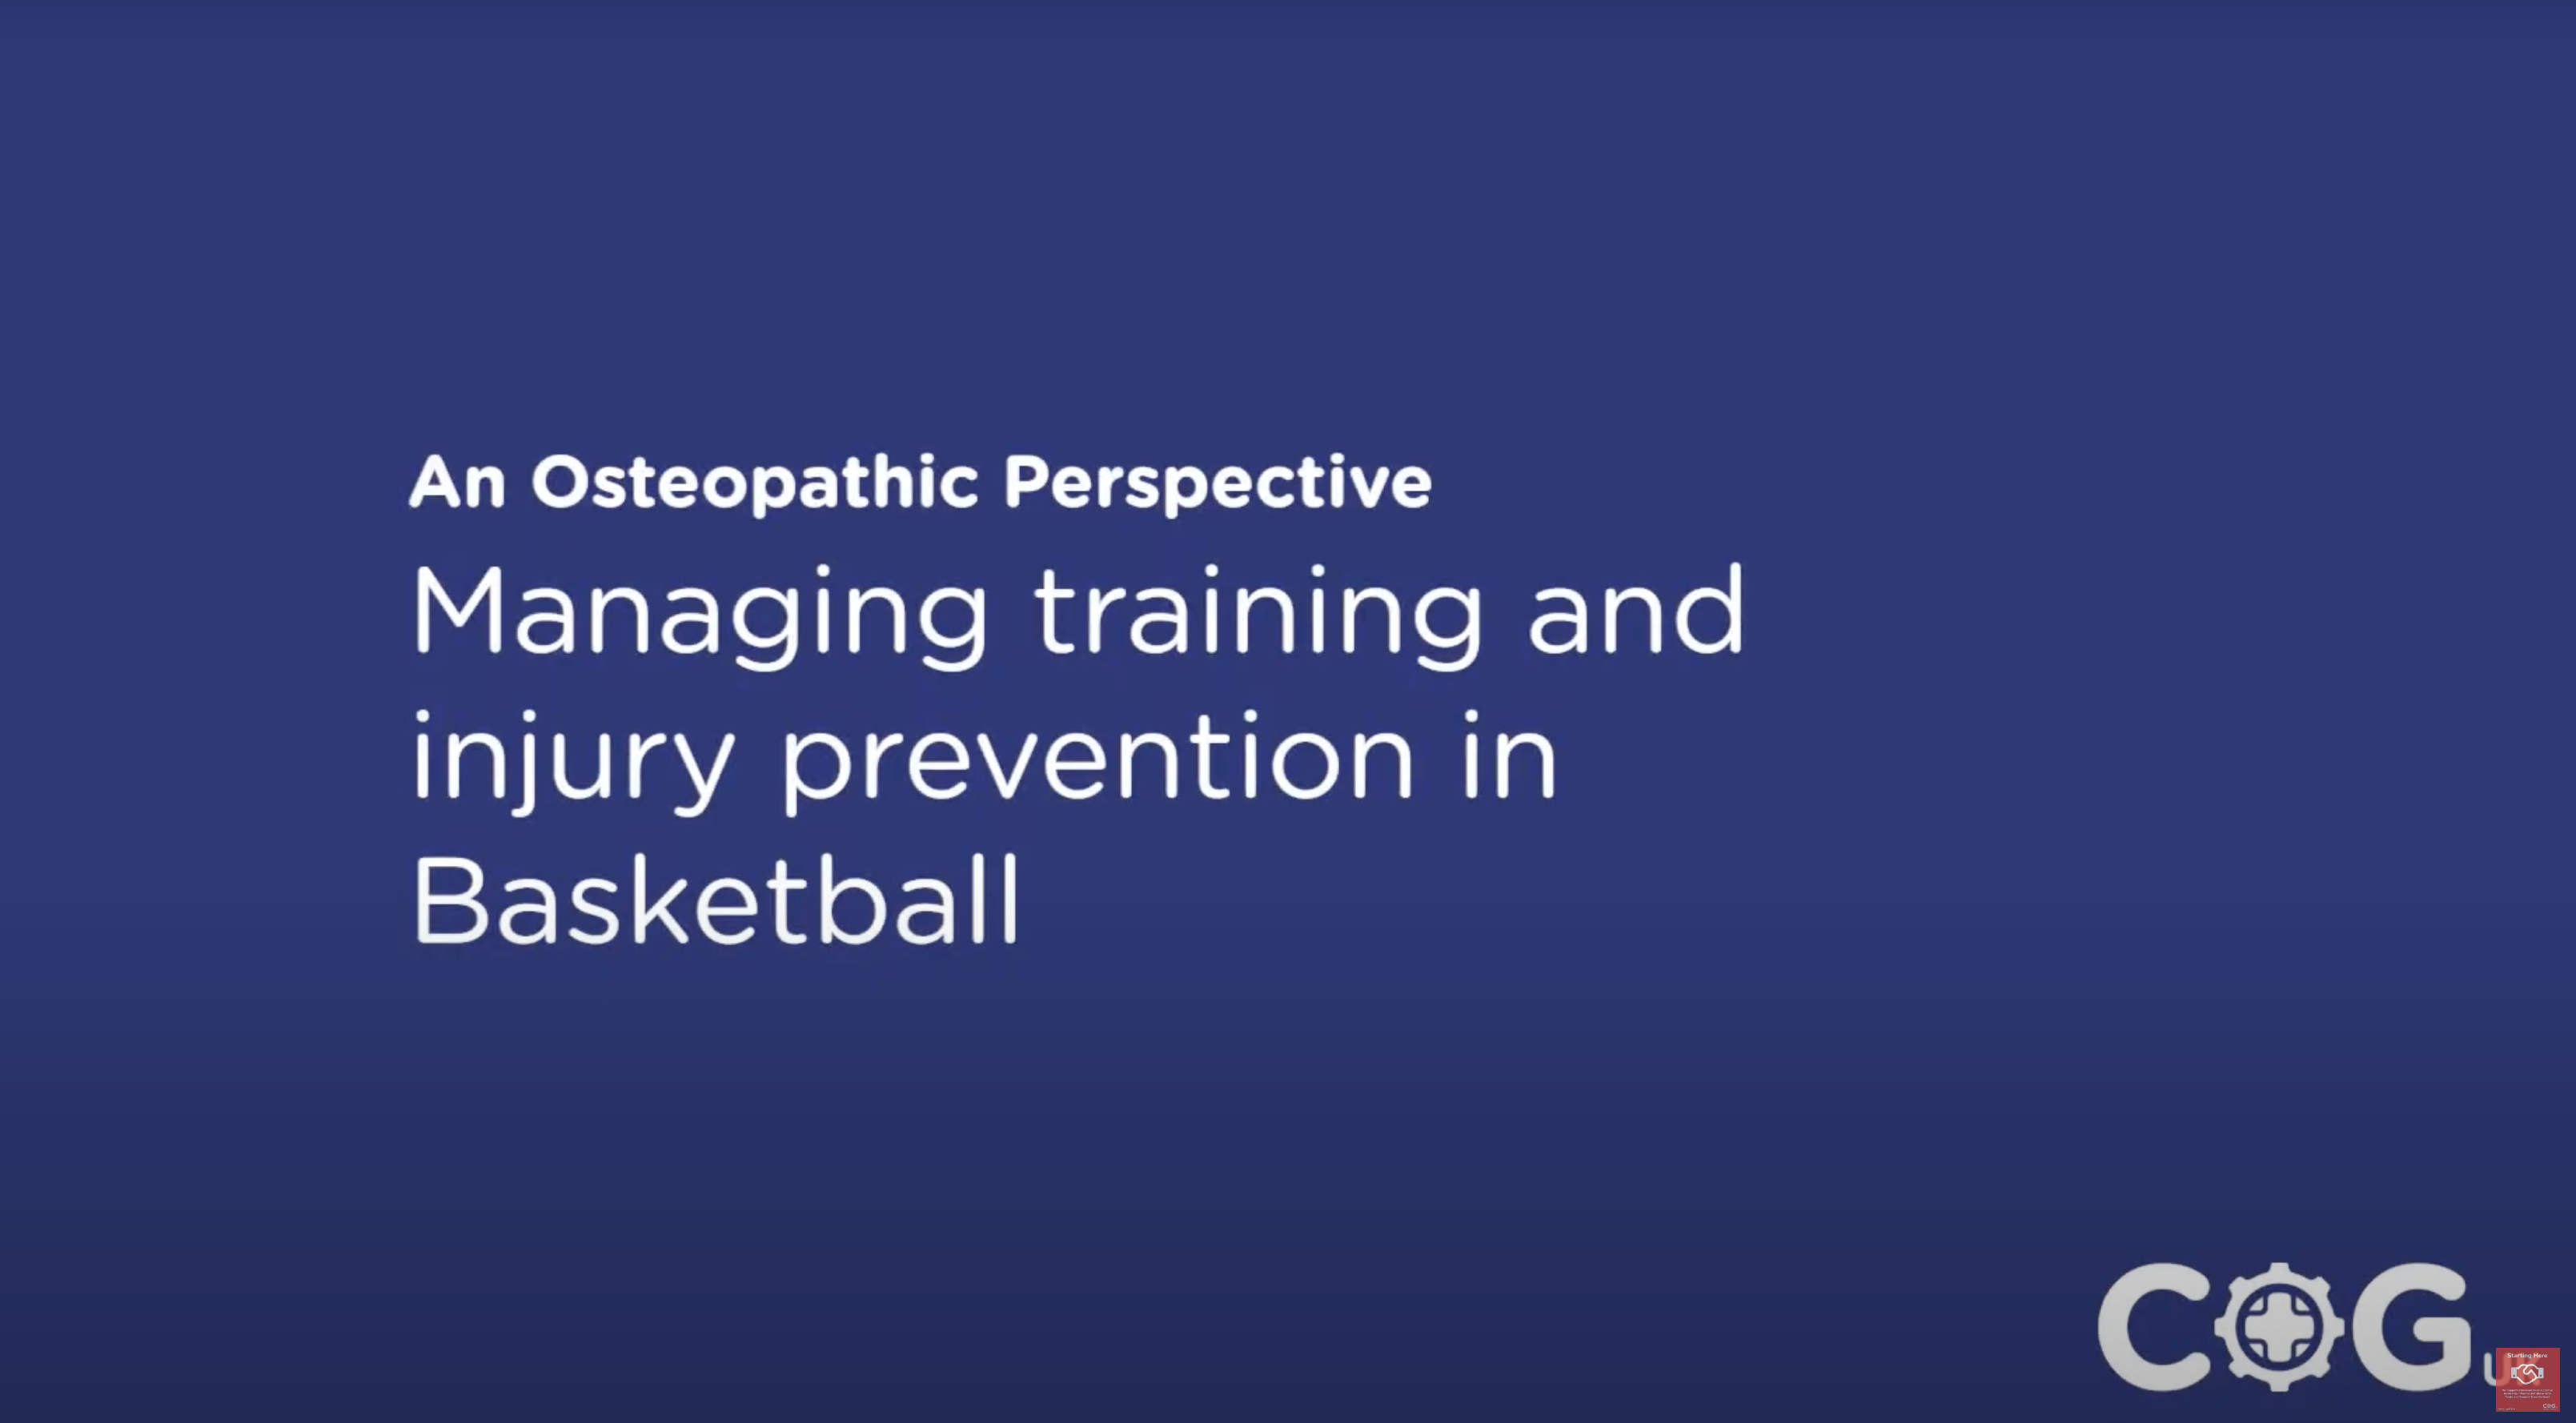 How To Manage Training And Prevent Injuries In Basketball?